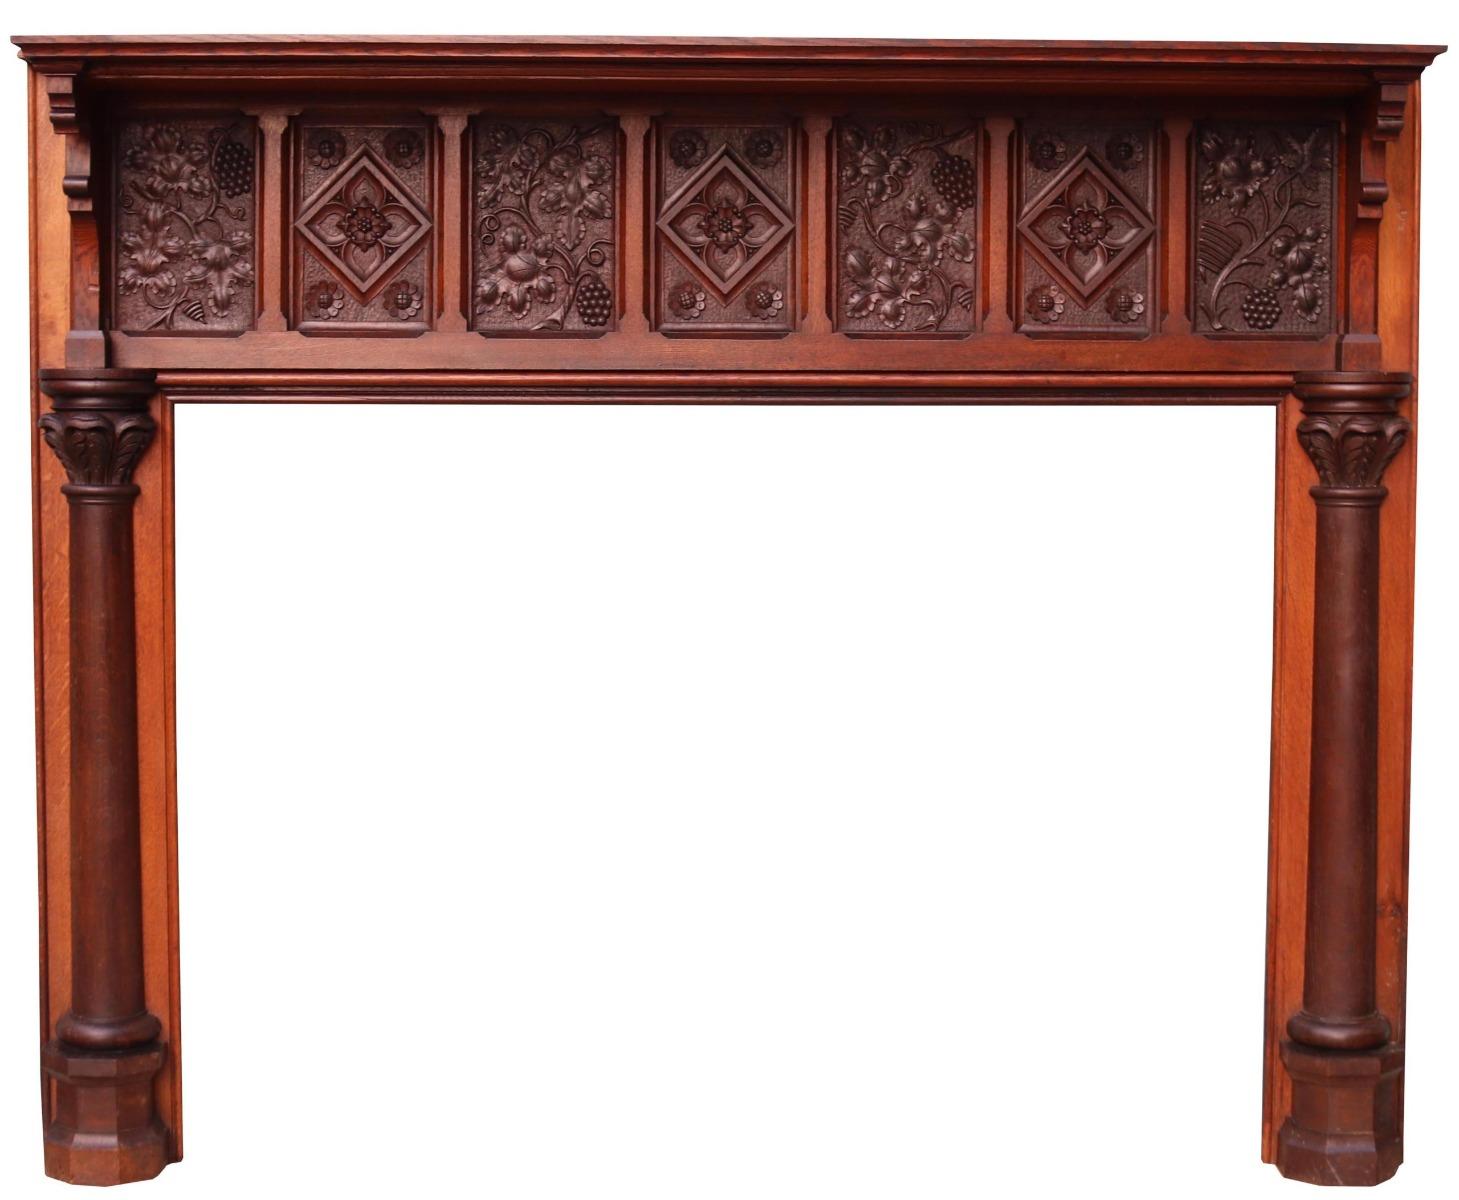 A large scale Arts & Crafts period fire surround salvaged from a large country house near Petersfield, Hampshire. The frieze panel with seven hand carved panels, with column supports
Additional dimensions
Opening height 107 cm/p
Opening